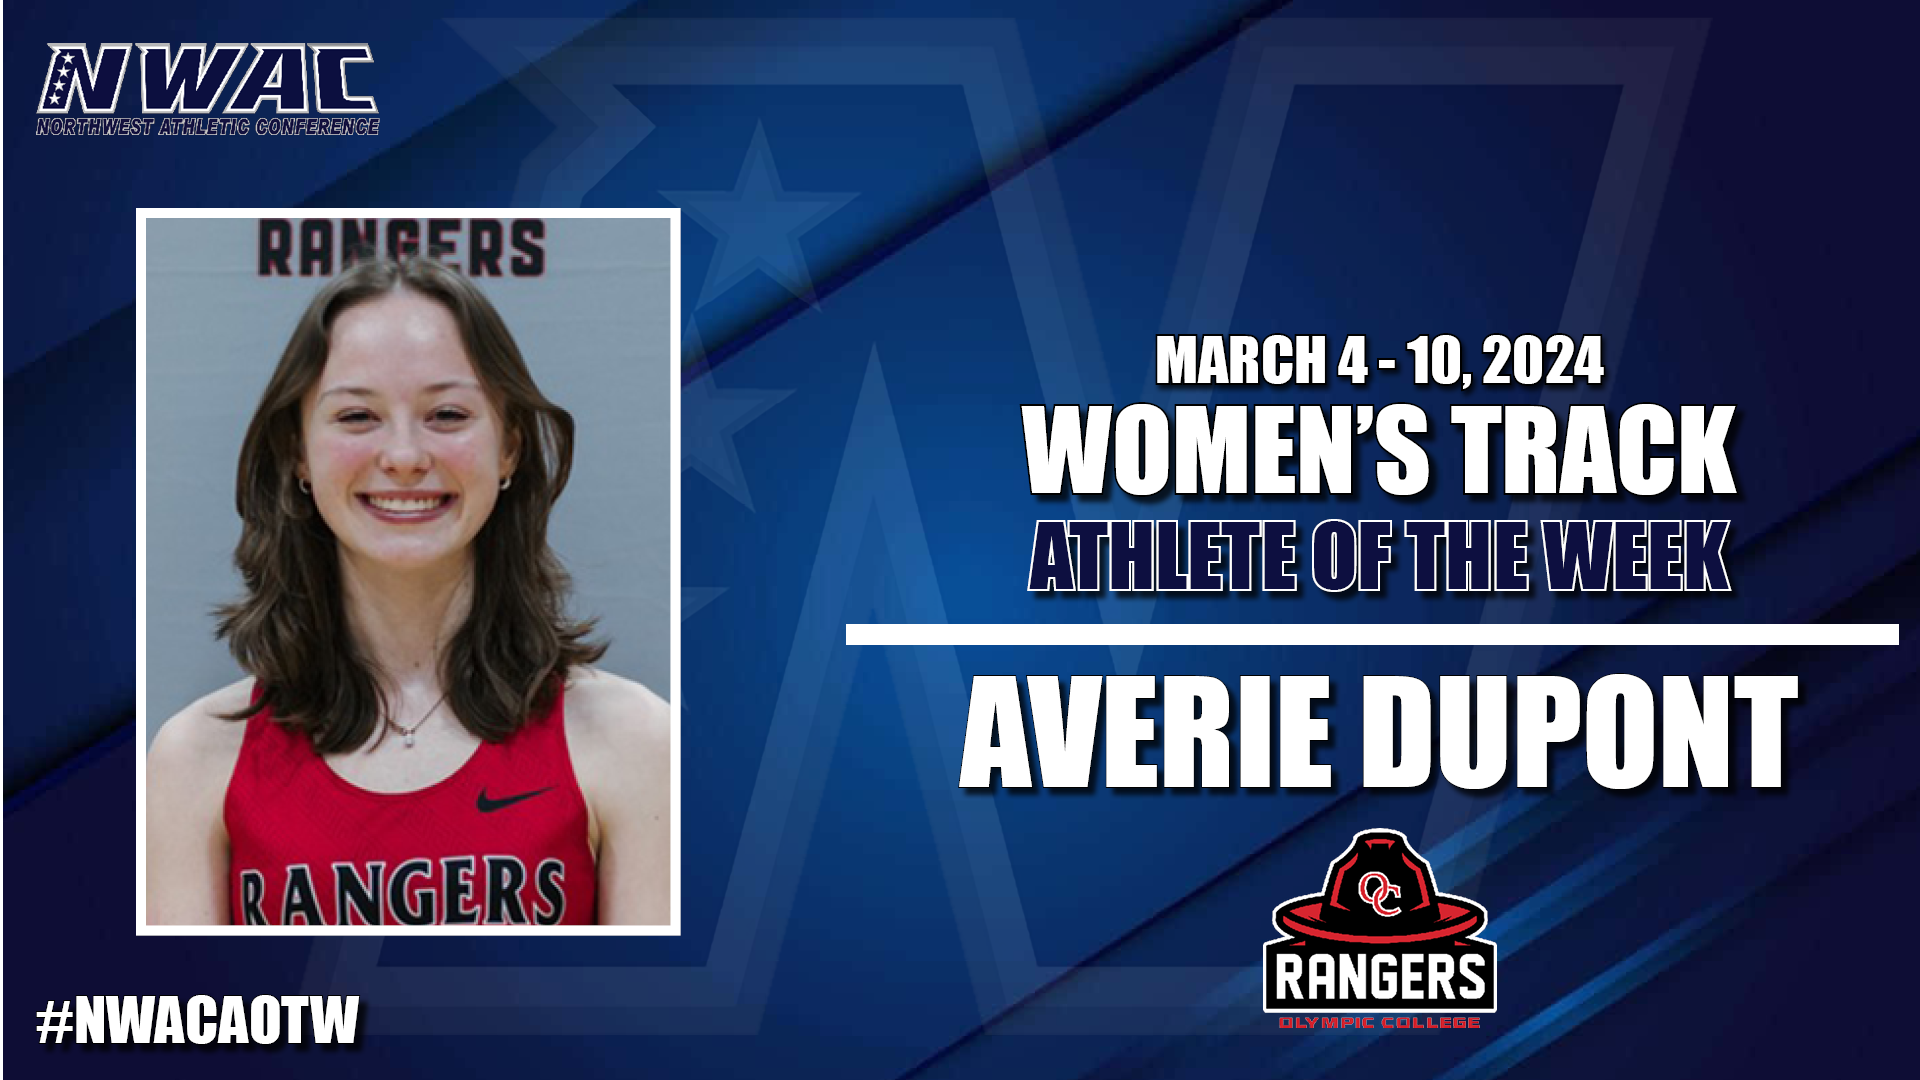 NWAC
March 4-10
Women's Track
Athlete of the week
Averie Dupont
#NWACAOTW